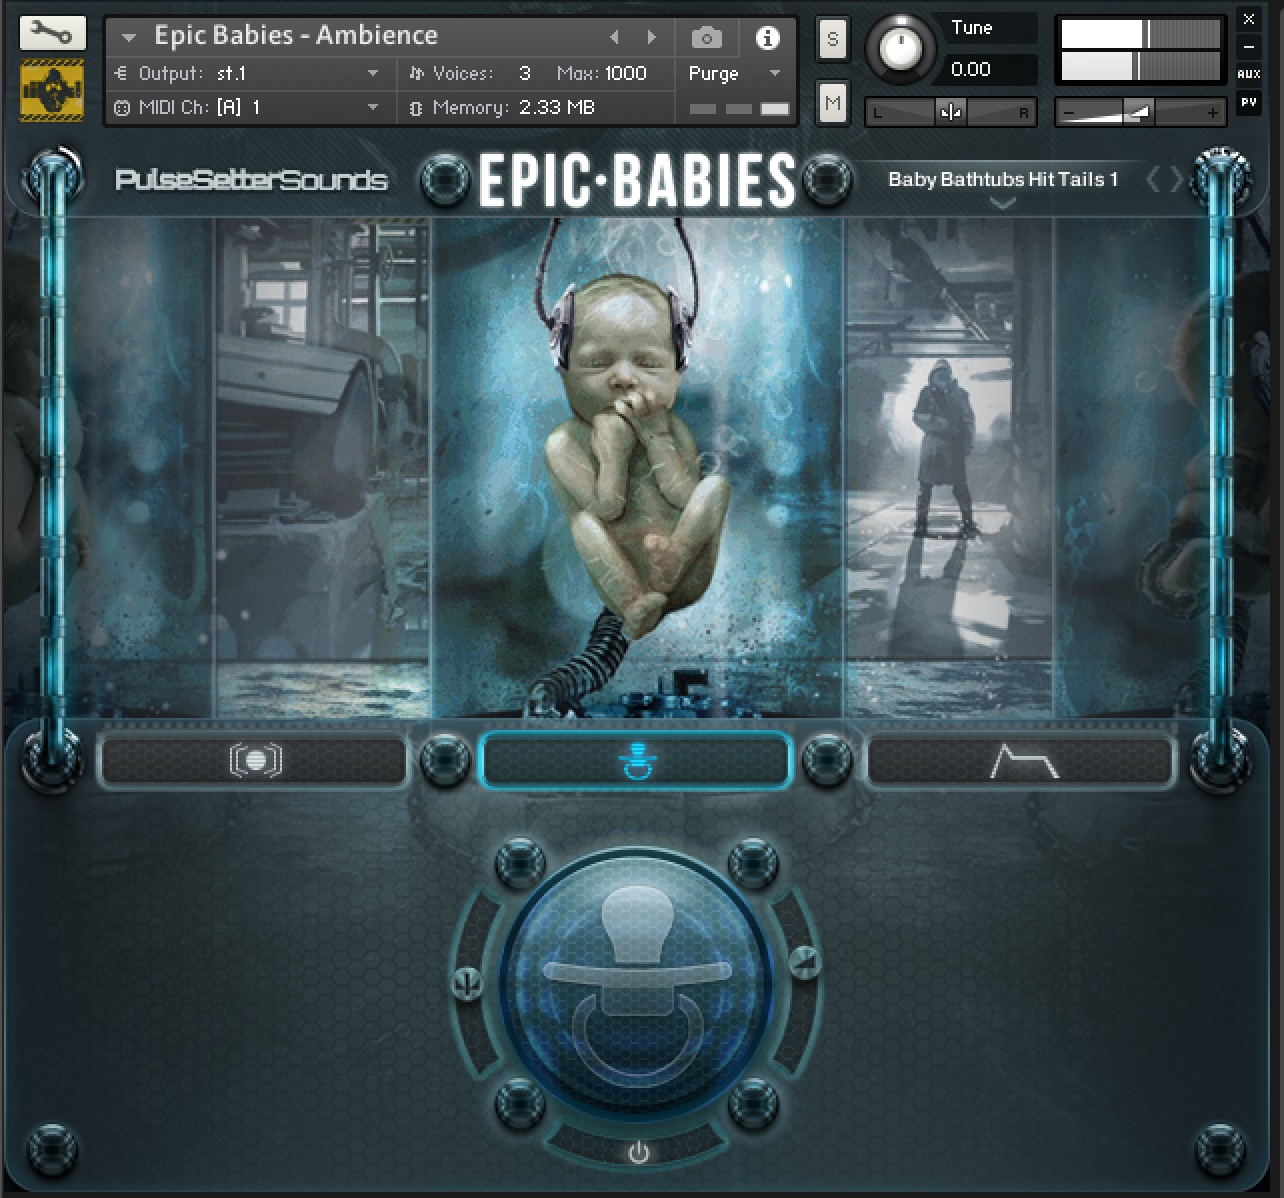 EPIC BABIES – Unique hybrid scoring instruments by PulseSetter-Sounds Ambience